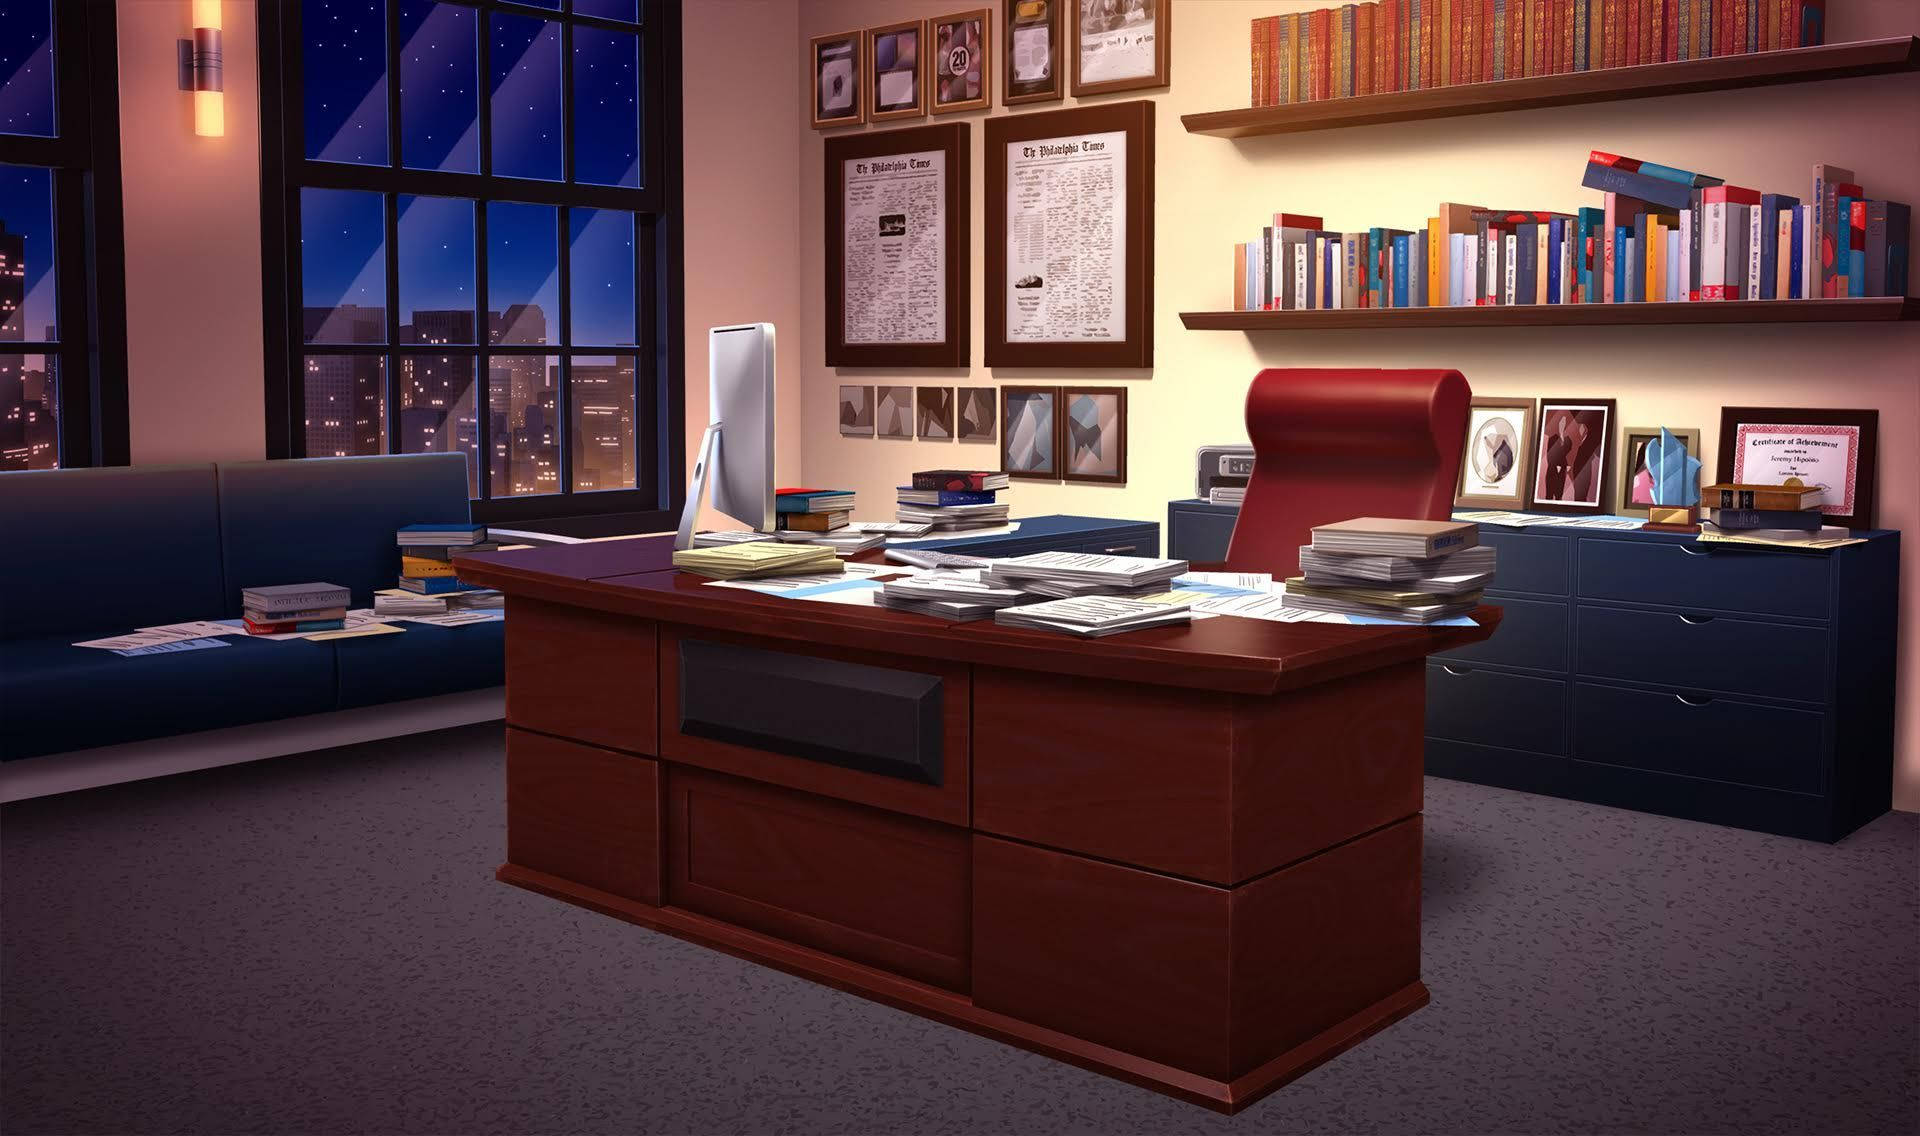 Classic Principal's Office Background